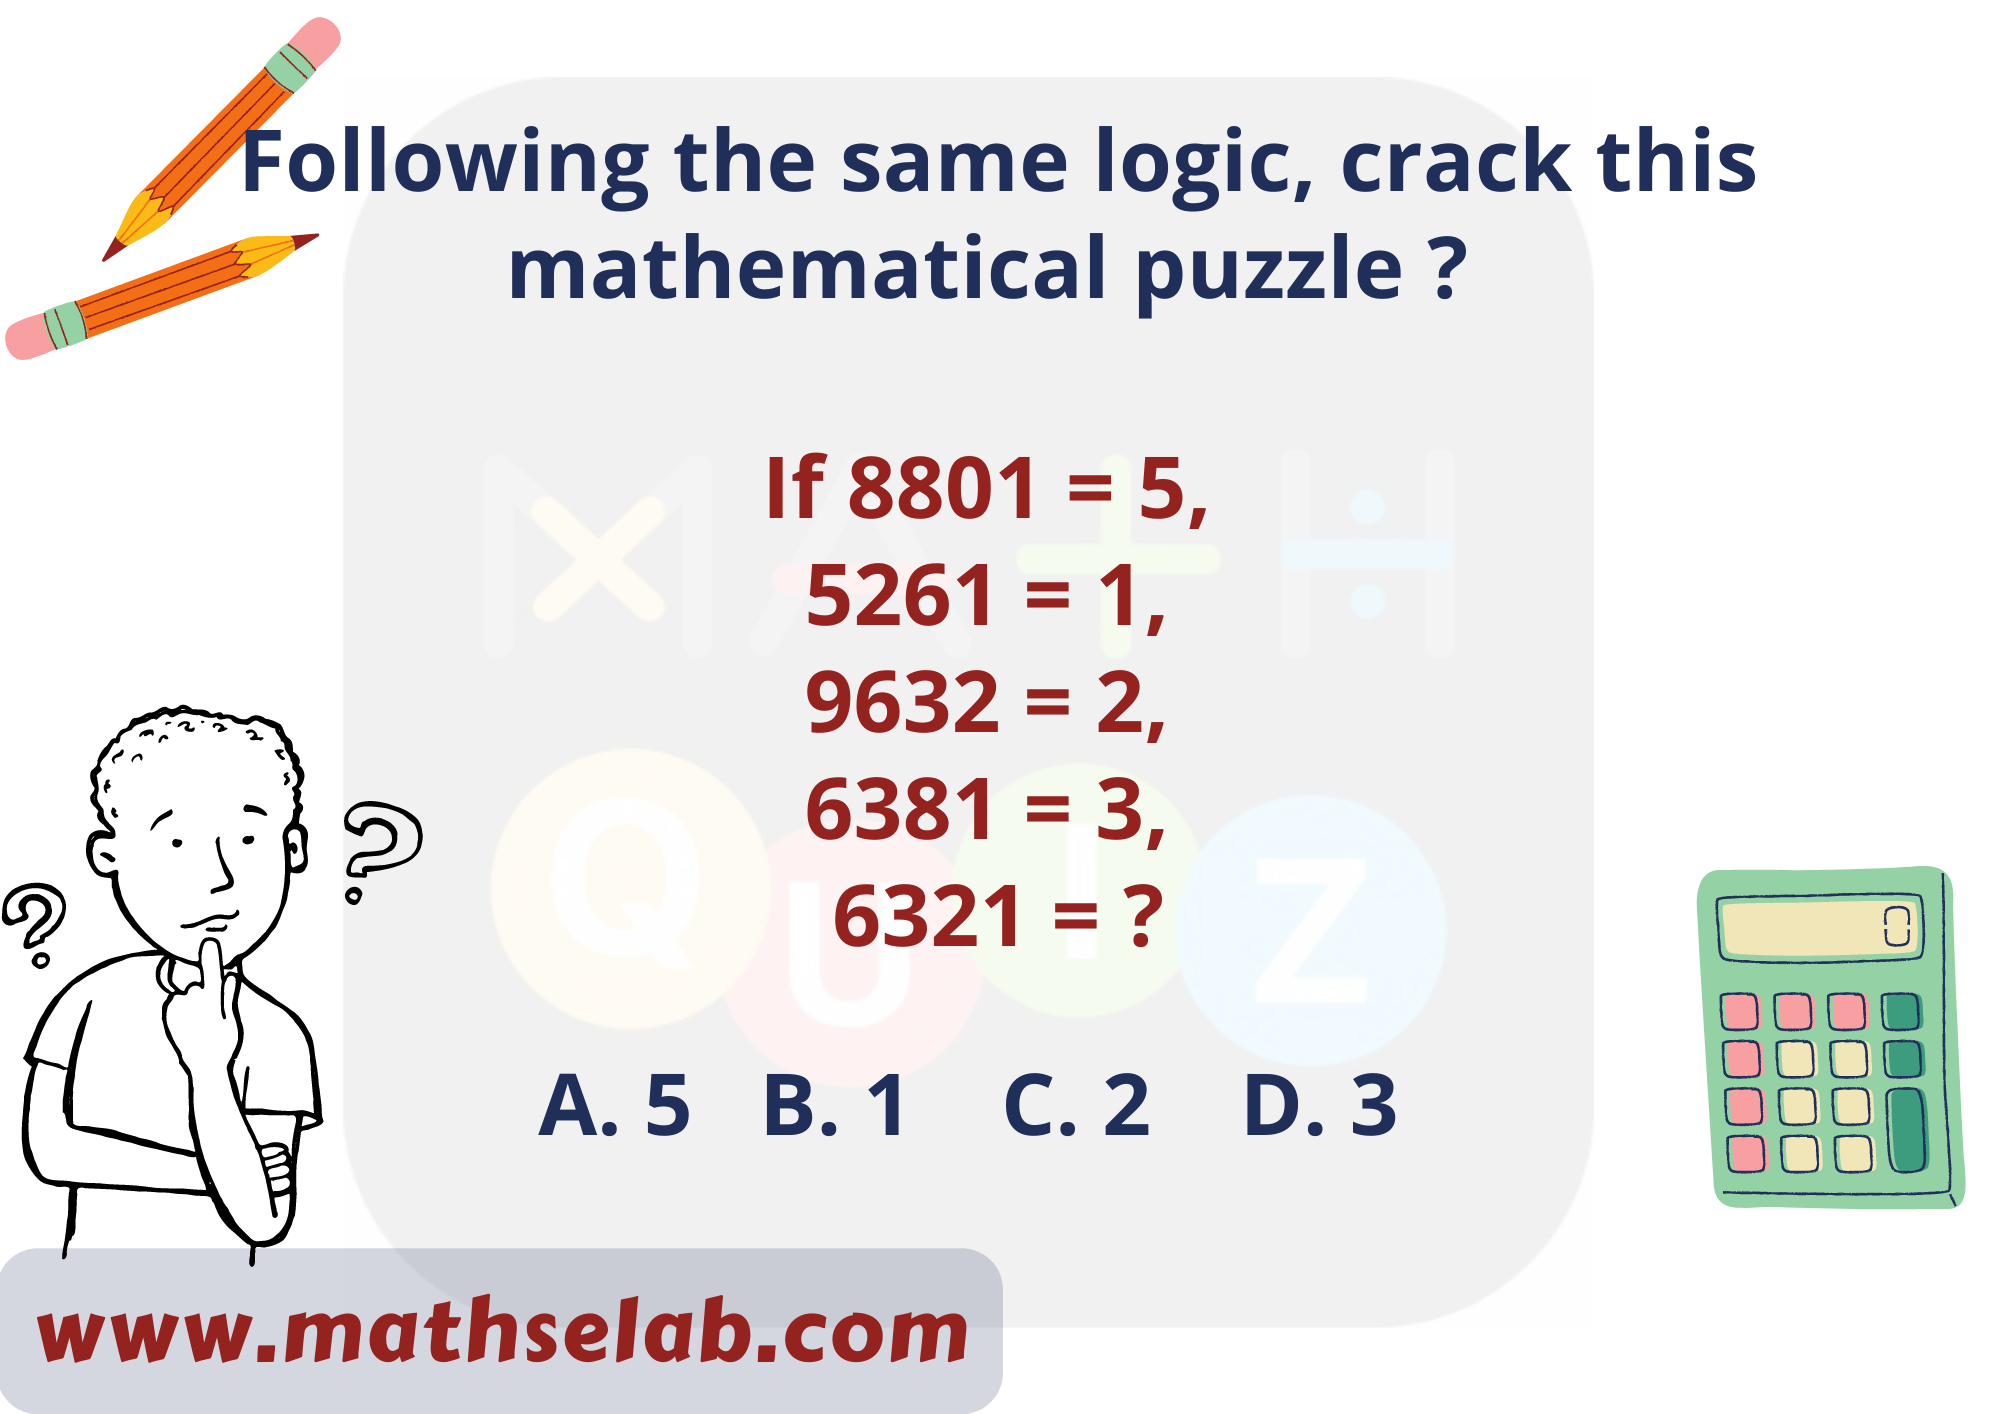 Following the same logic, crack this mathematical puzzle ? If 8801 = 5, 5261 = 1, 9632 = 2, 6381 = 3, 6321 = ?